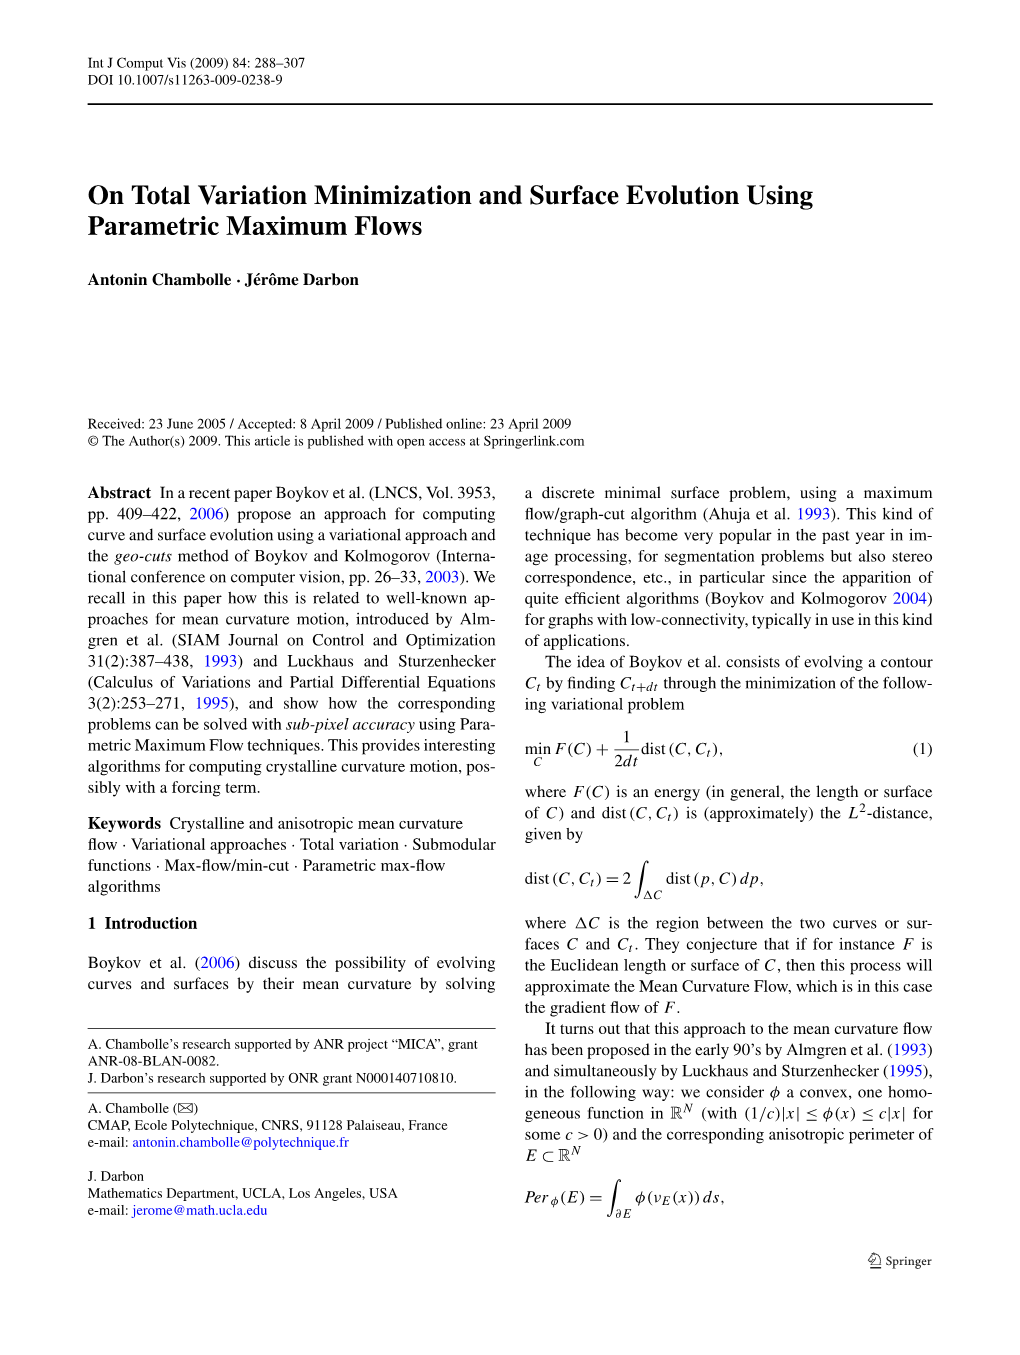 On Total Variation Minimization and Surface Evolution Using Parametric Maximum Flows